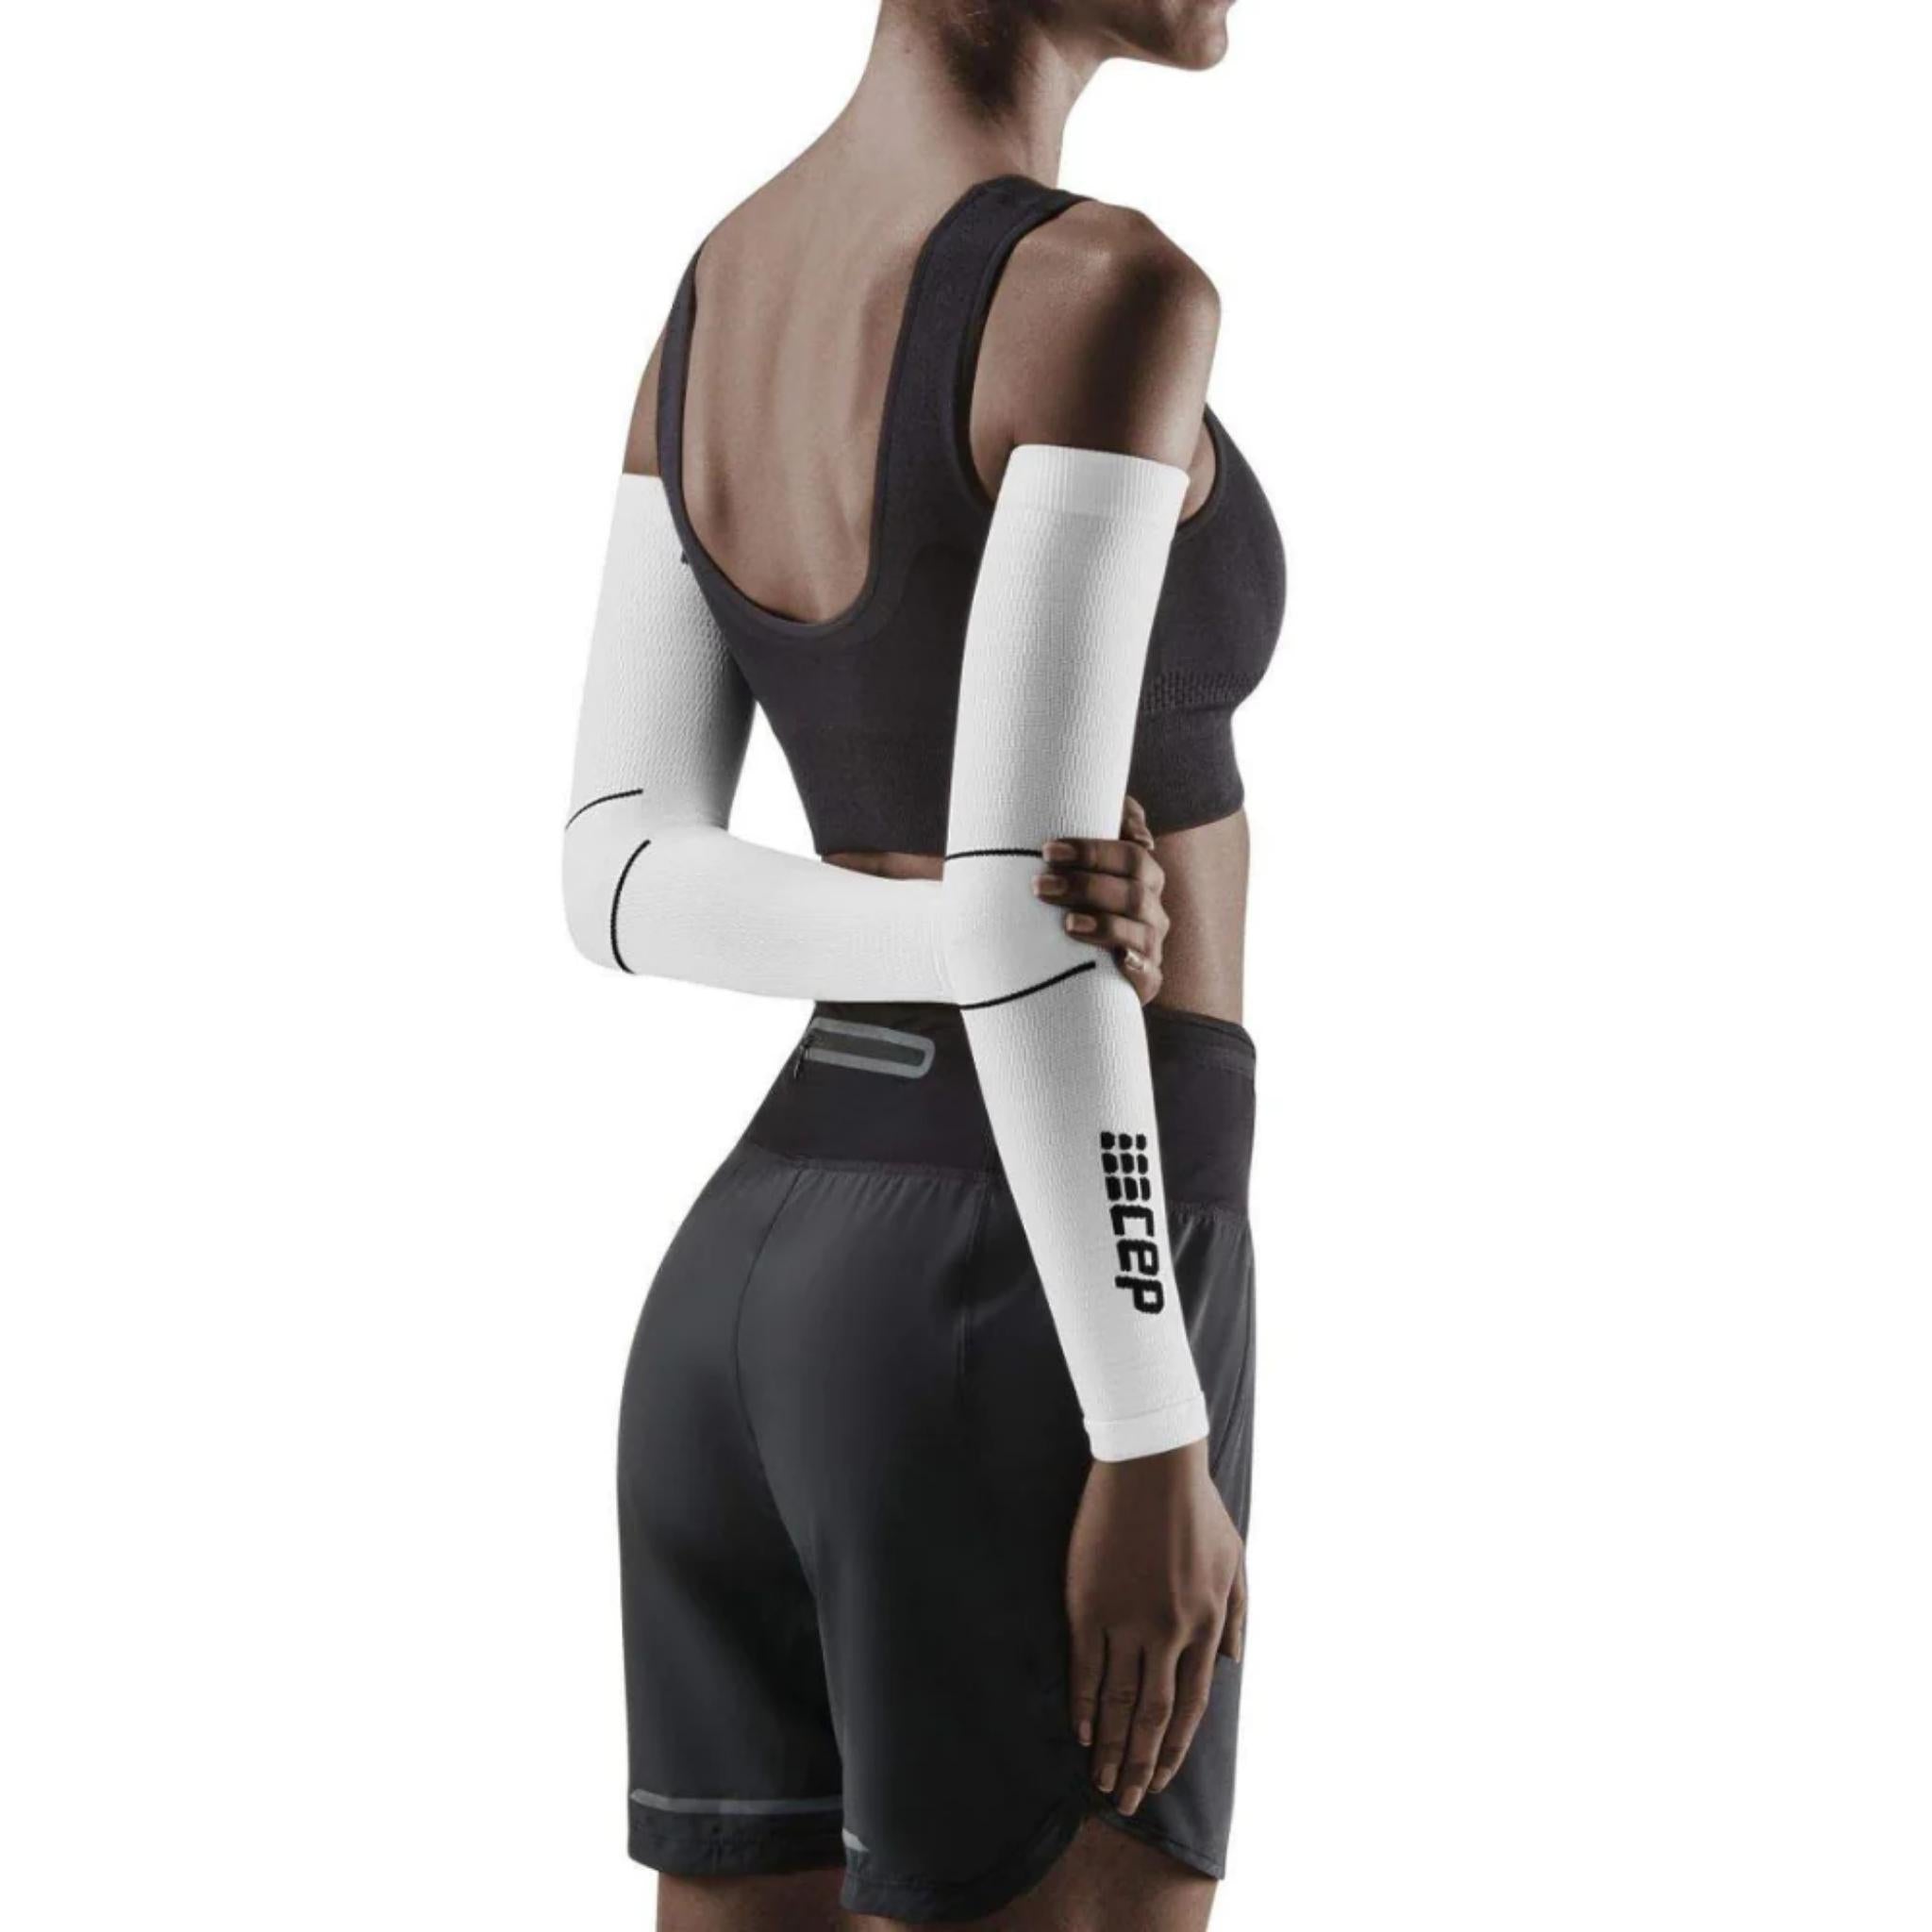 Sports Compression Arm Sleeves | Unisex